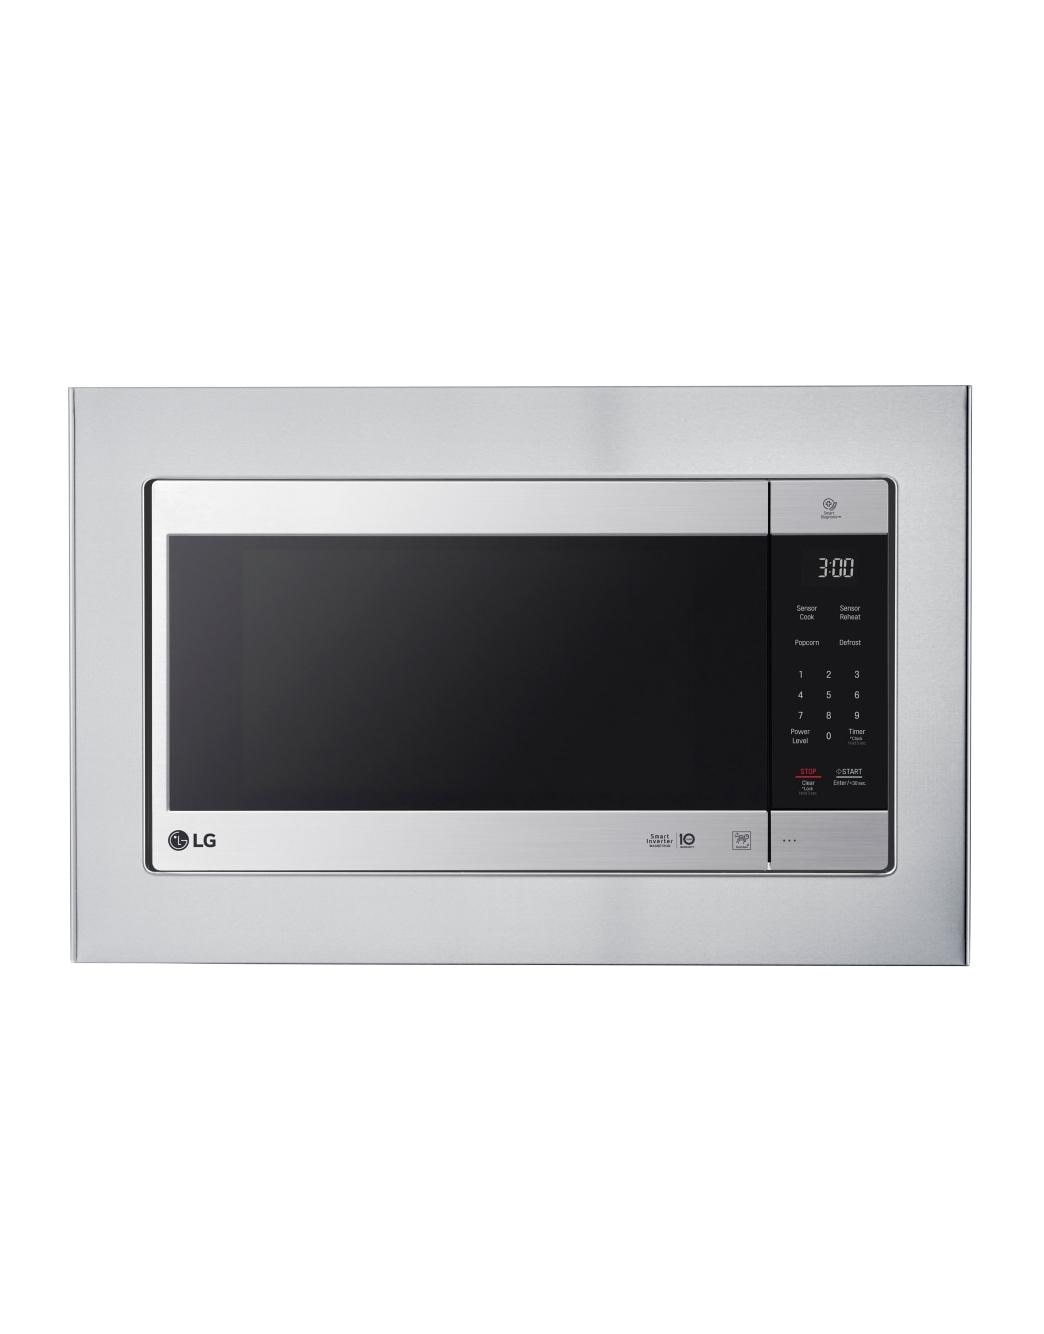 3861w1a043h-lg-microwave-installation-mounting-hardware-kit-assembly-appliance-parts-expert